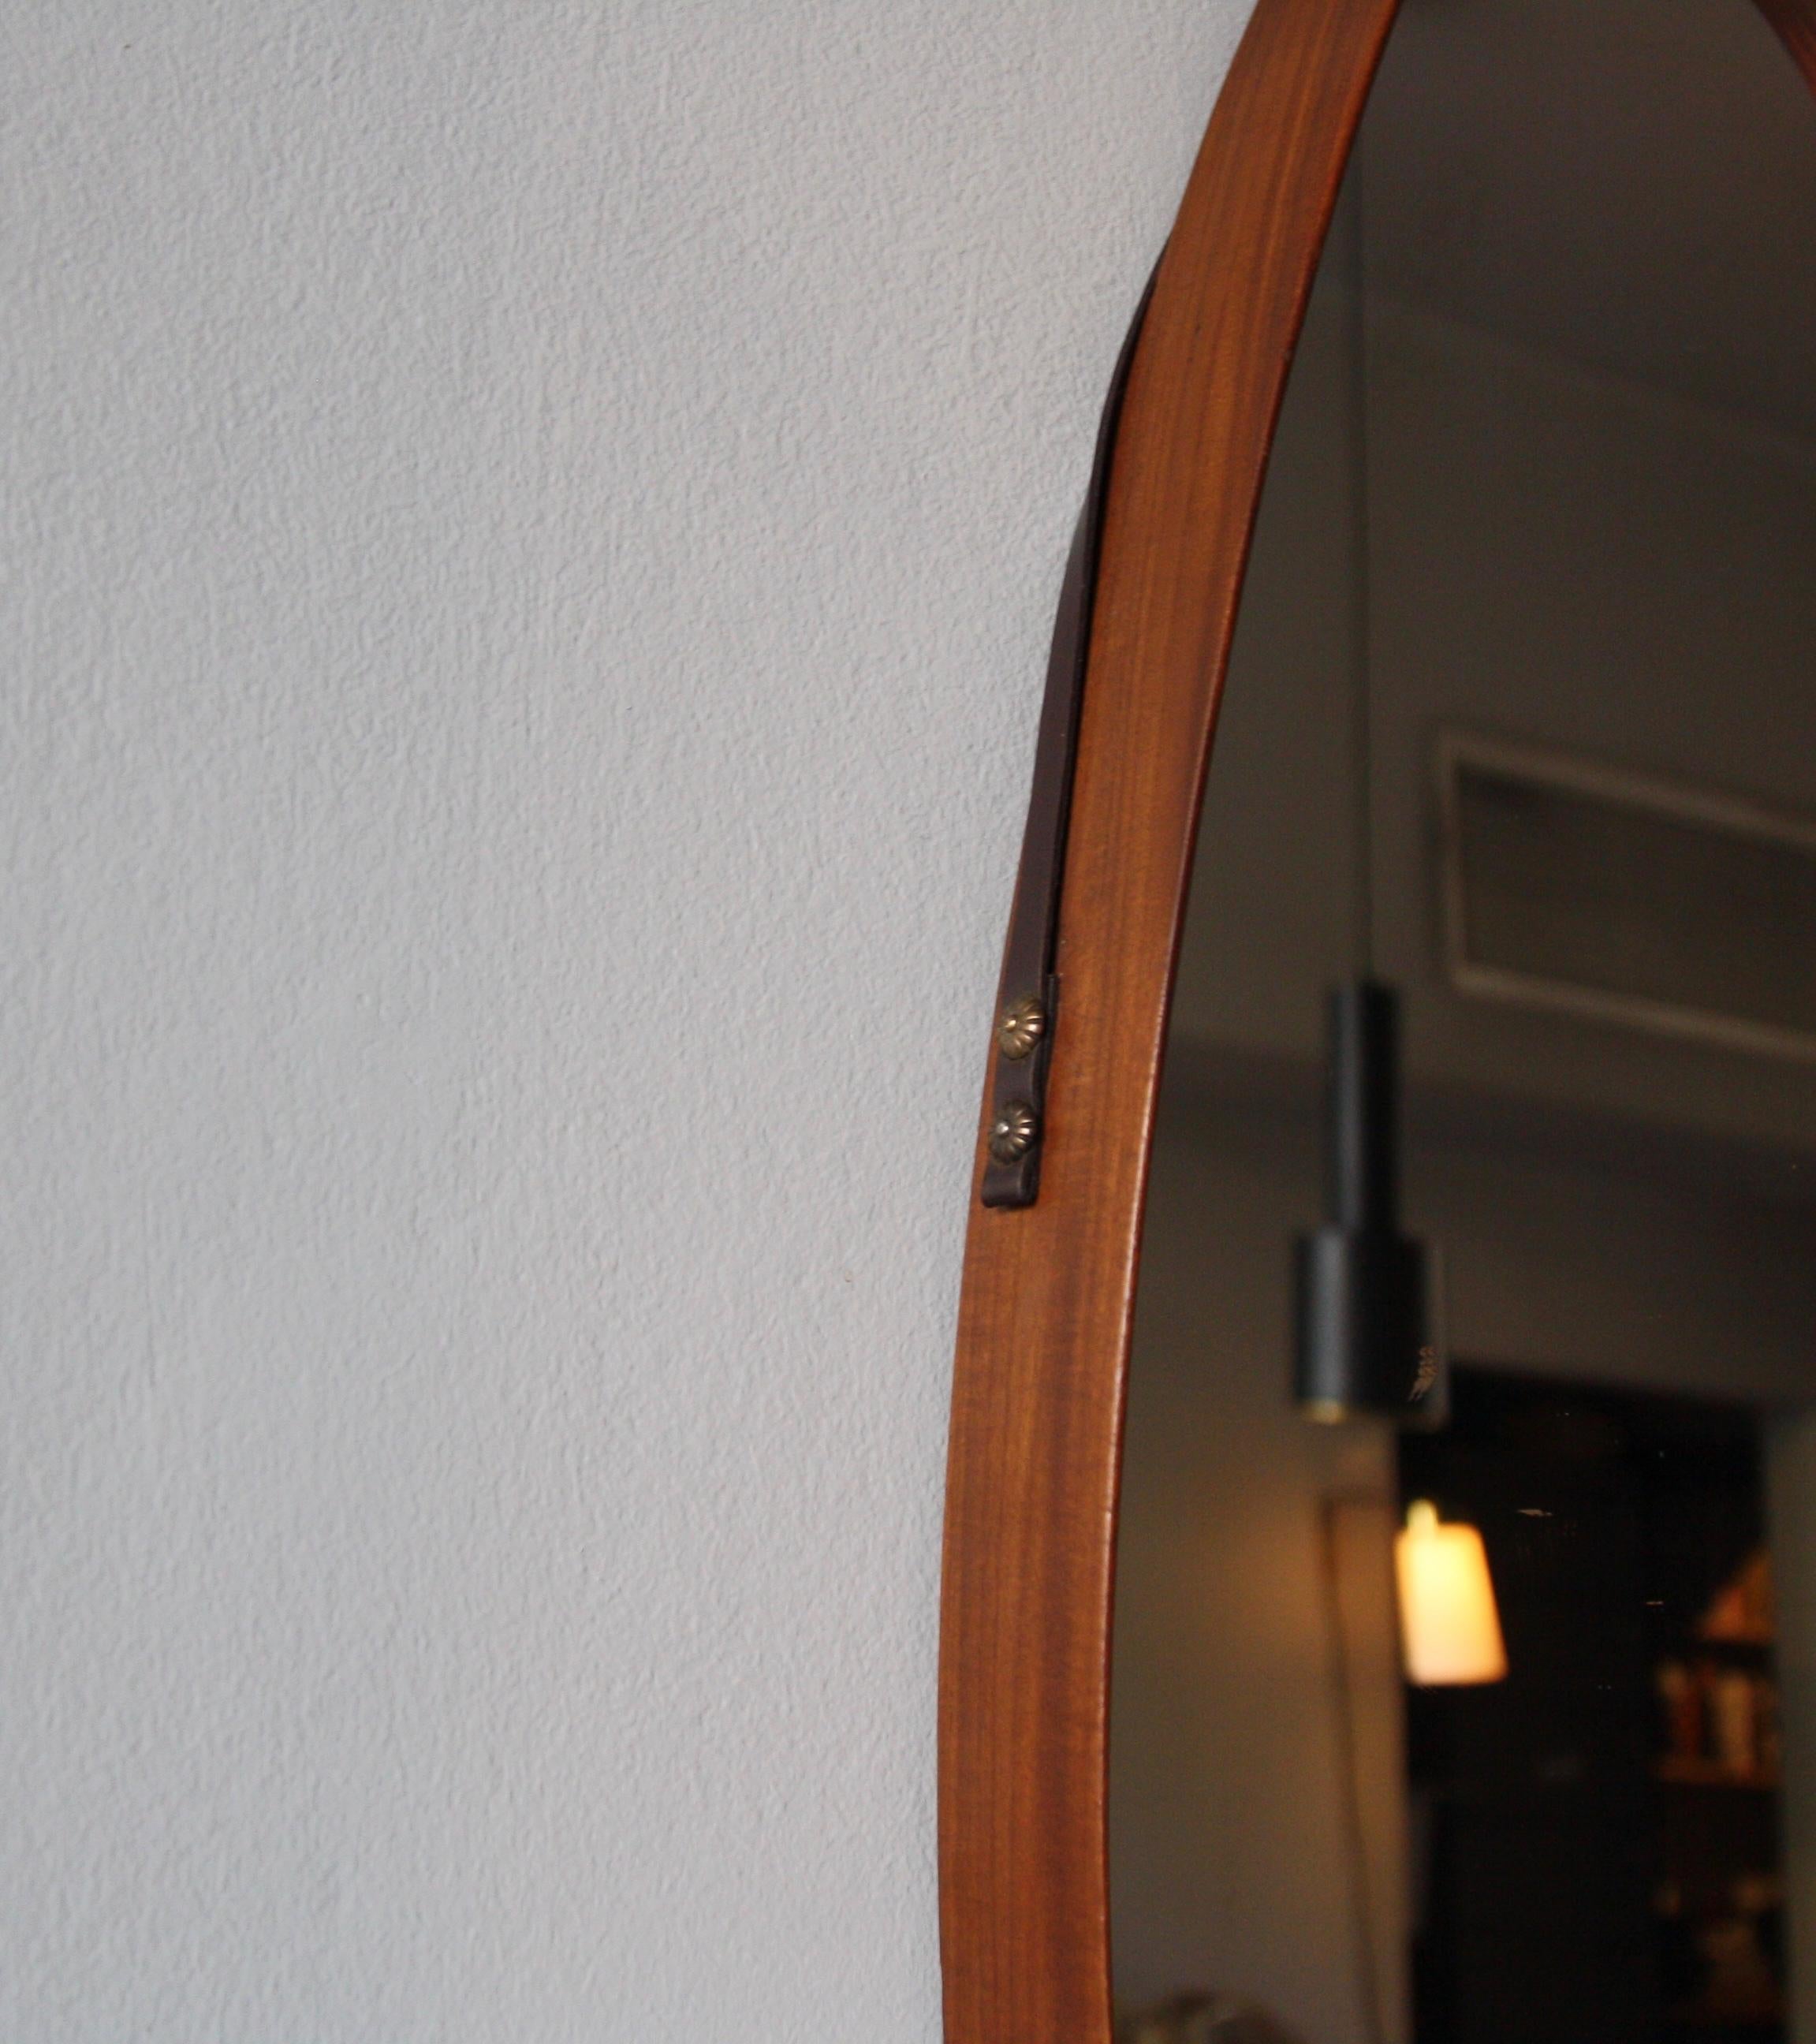 Mid-Century Modern Danish Oval Shaped Vintage Wall Mirror with Leather Hanging Strap, circa 1950